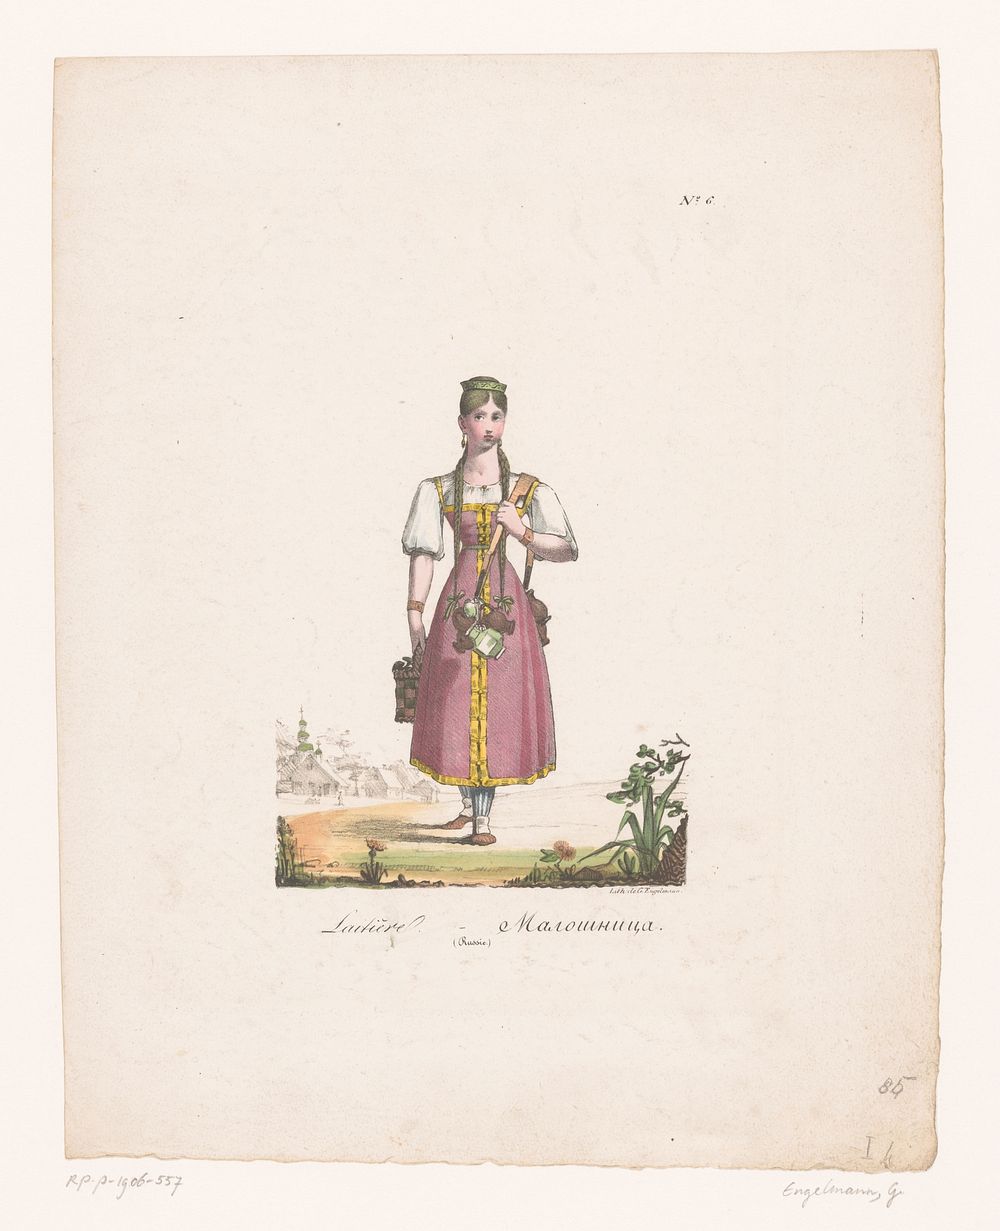 Russische melkverkoopster (1816 - 1839) by anonymous and Gottfried Engelmann